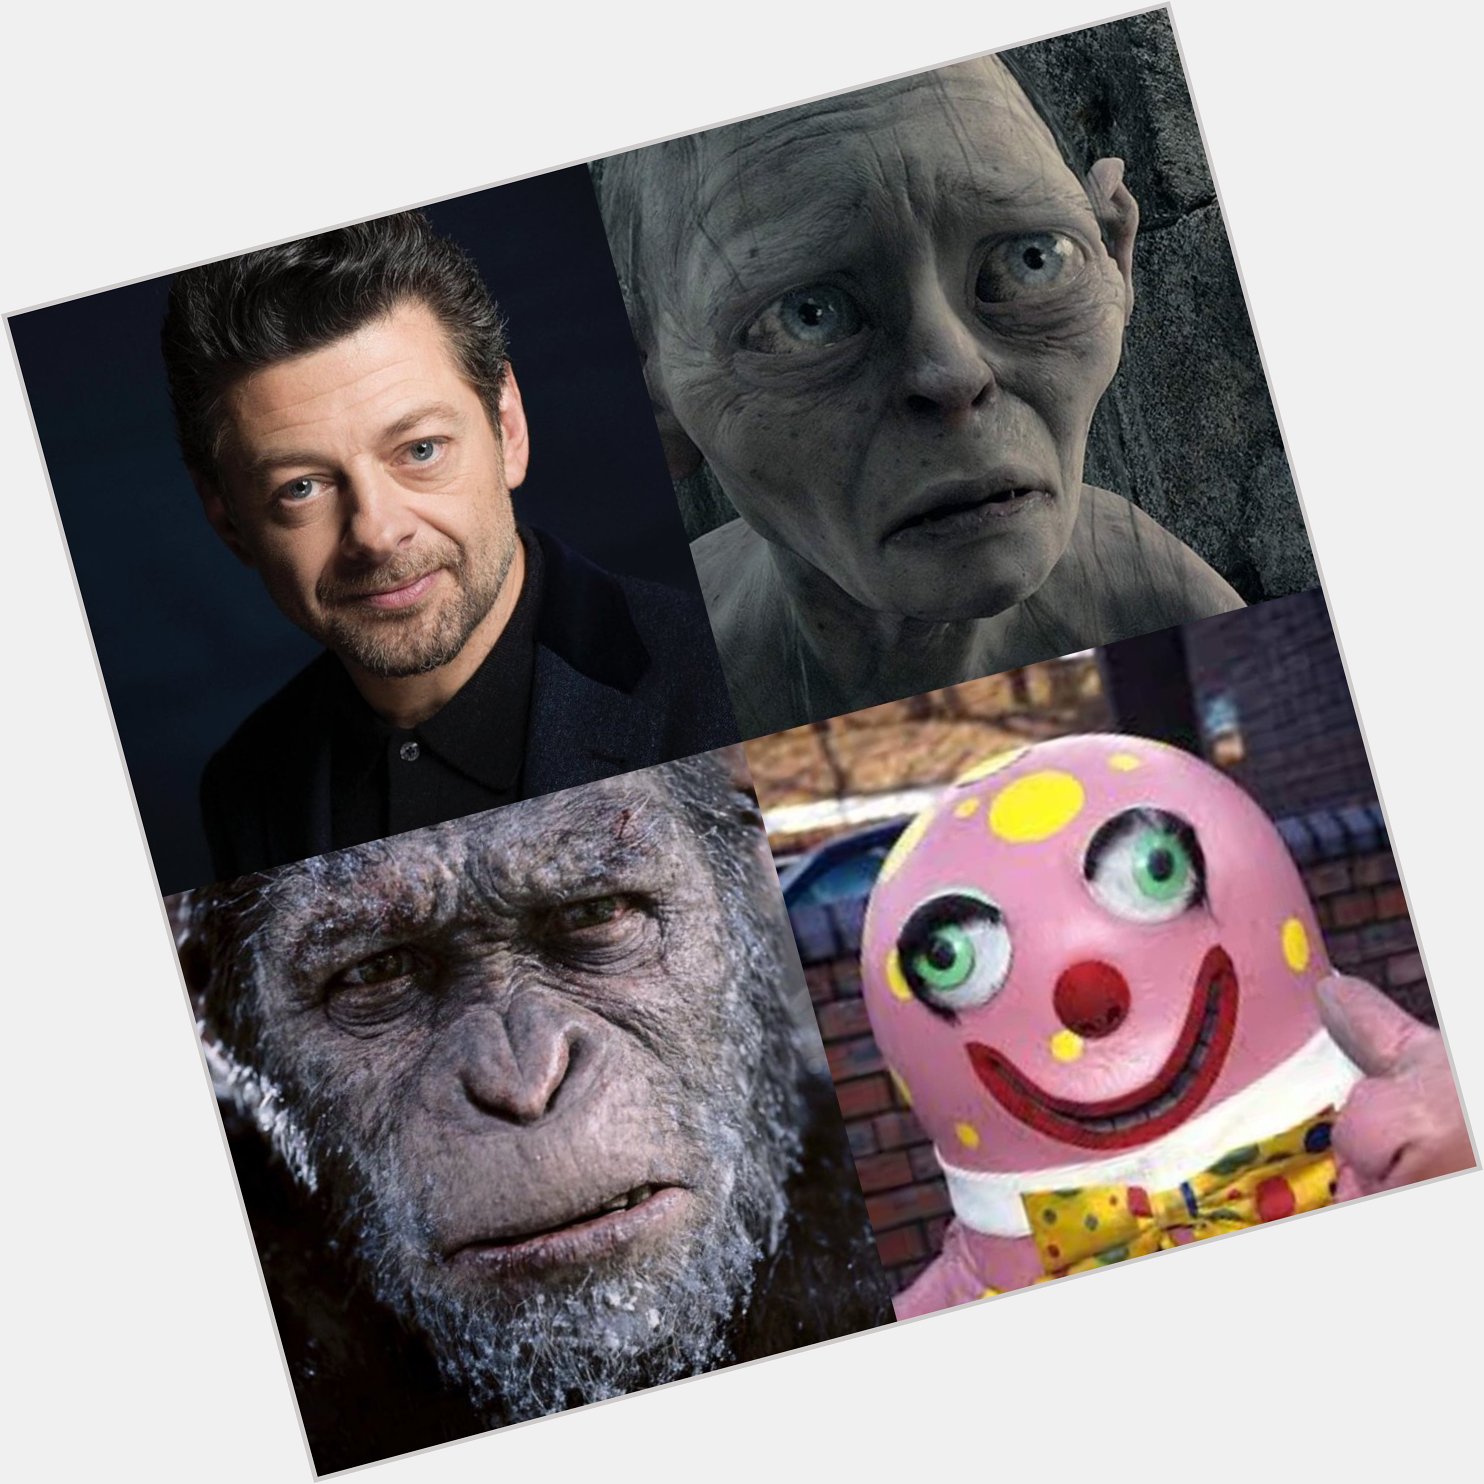 Happy Birthday to the master of disguise Andy Serkis 